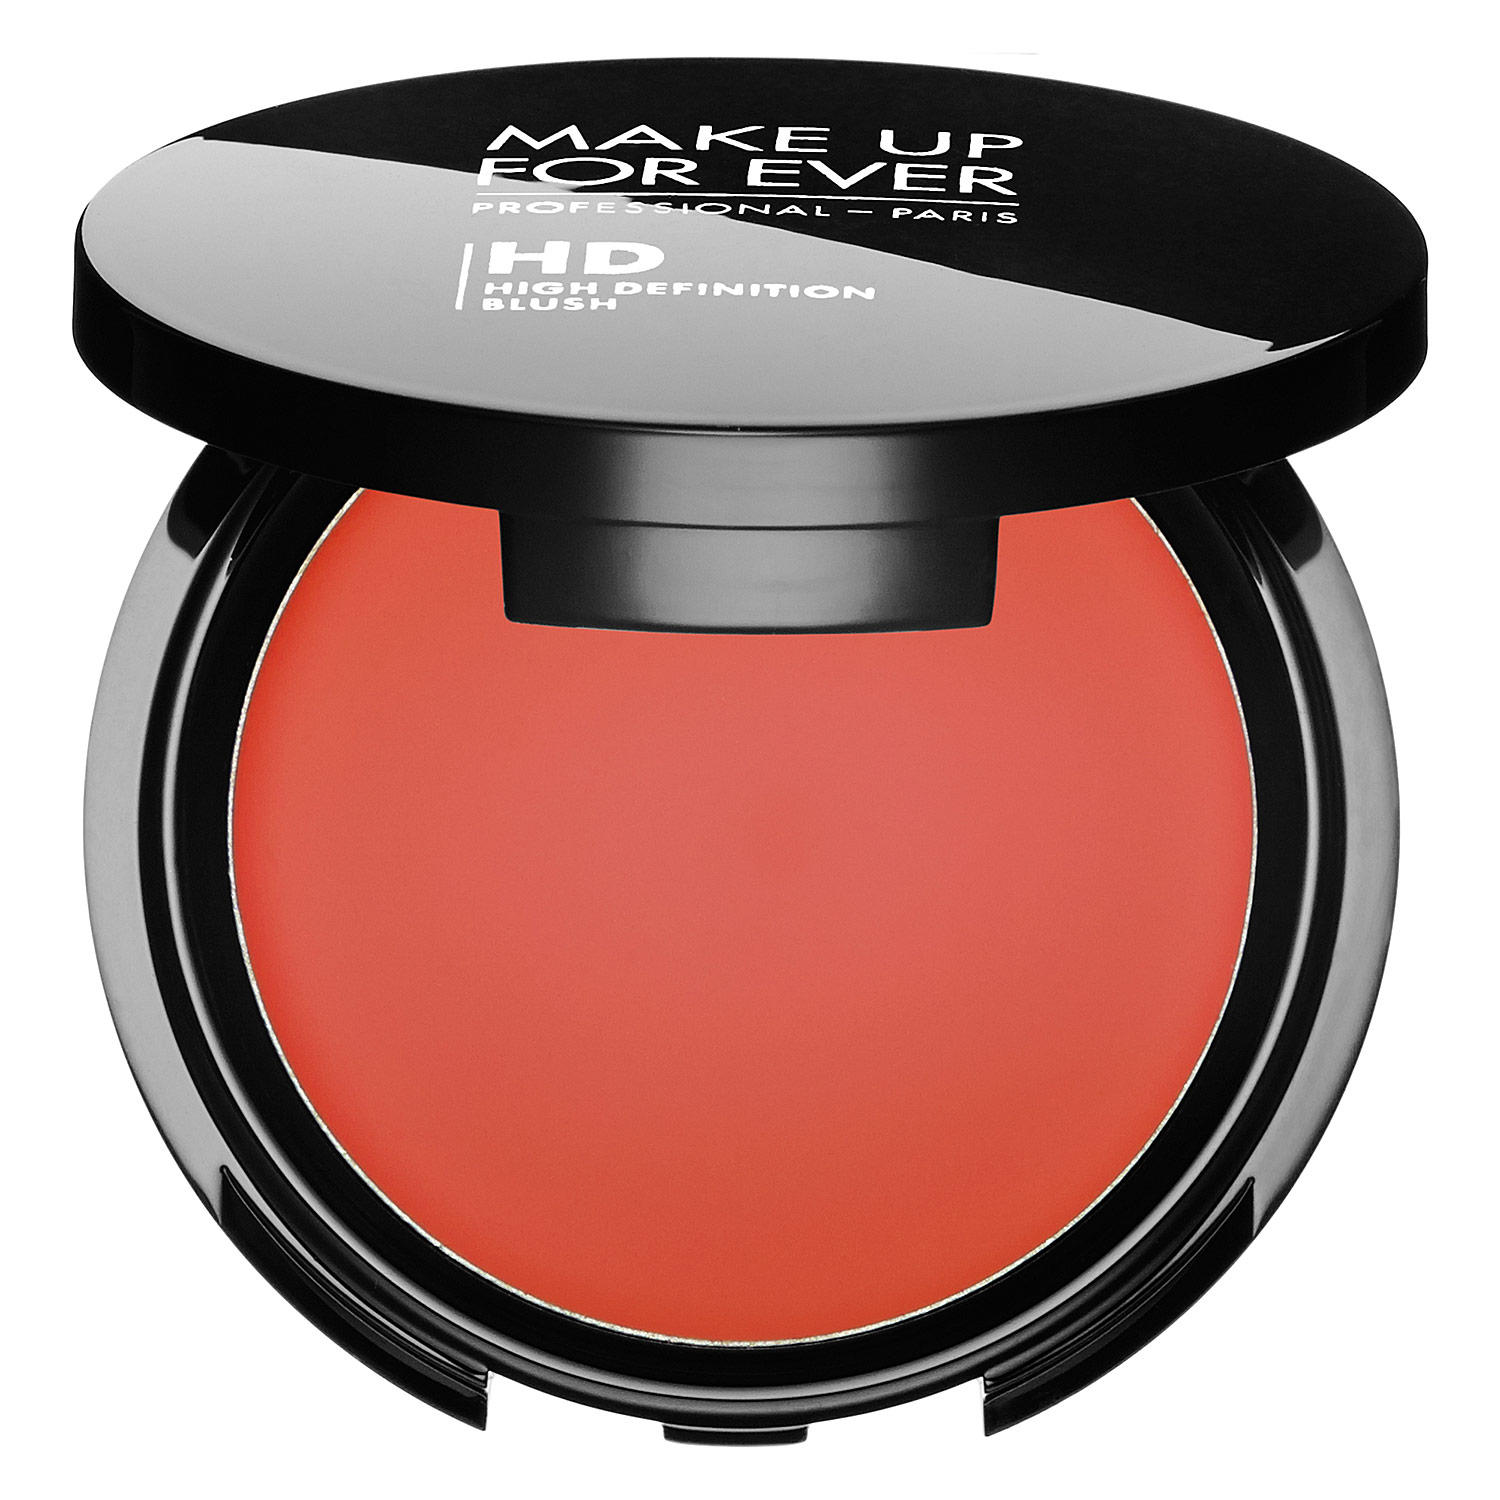 Makeup Forever Second Skin Cream Blush Coral 410 